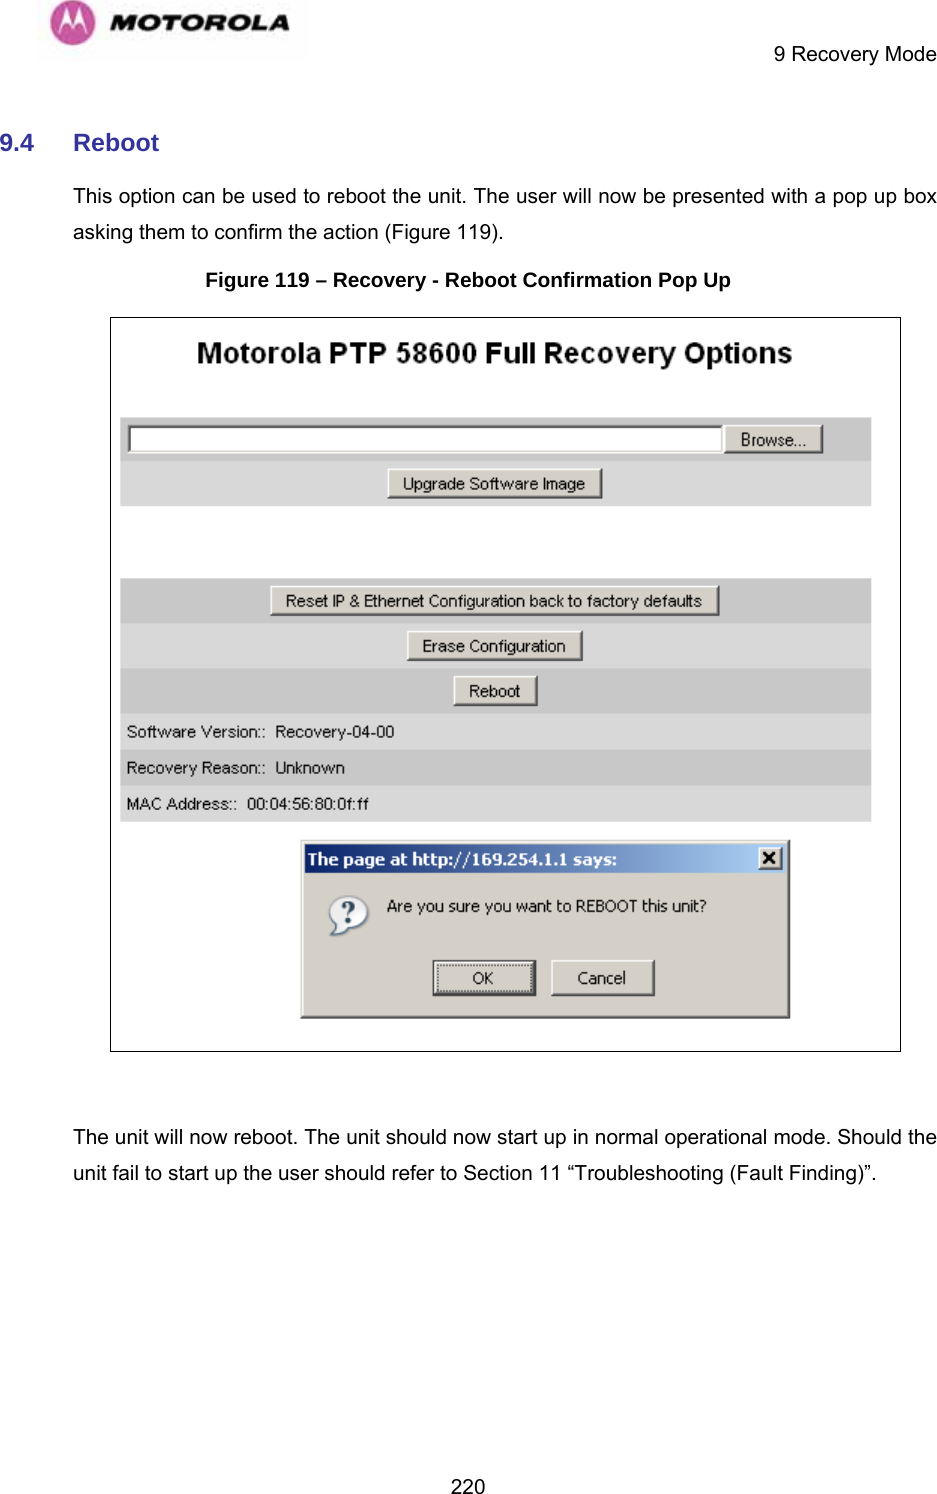     9 Recovery Mode  2209.4  Reboot This option can be used to reboot the unit. The user will now be presented with a pop up box asking them to confirm the action (Figure 119). Figure 119 – Recovery - Reboot Confirmation Pop Up   The unit will now reboot. The unit should now start up in normal operational mode. Should the unit fail to start up the user should refer to Section 11 “Troubleshooting (Fault Finding)”.  